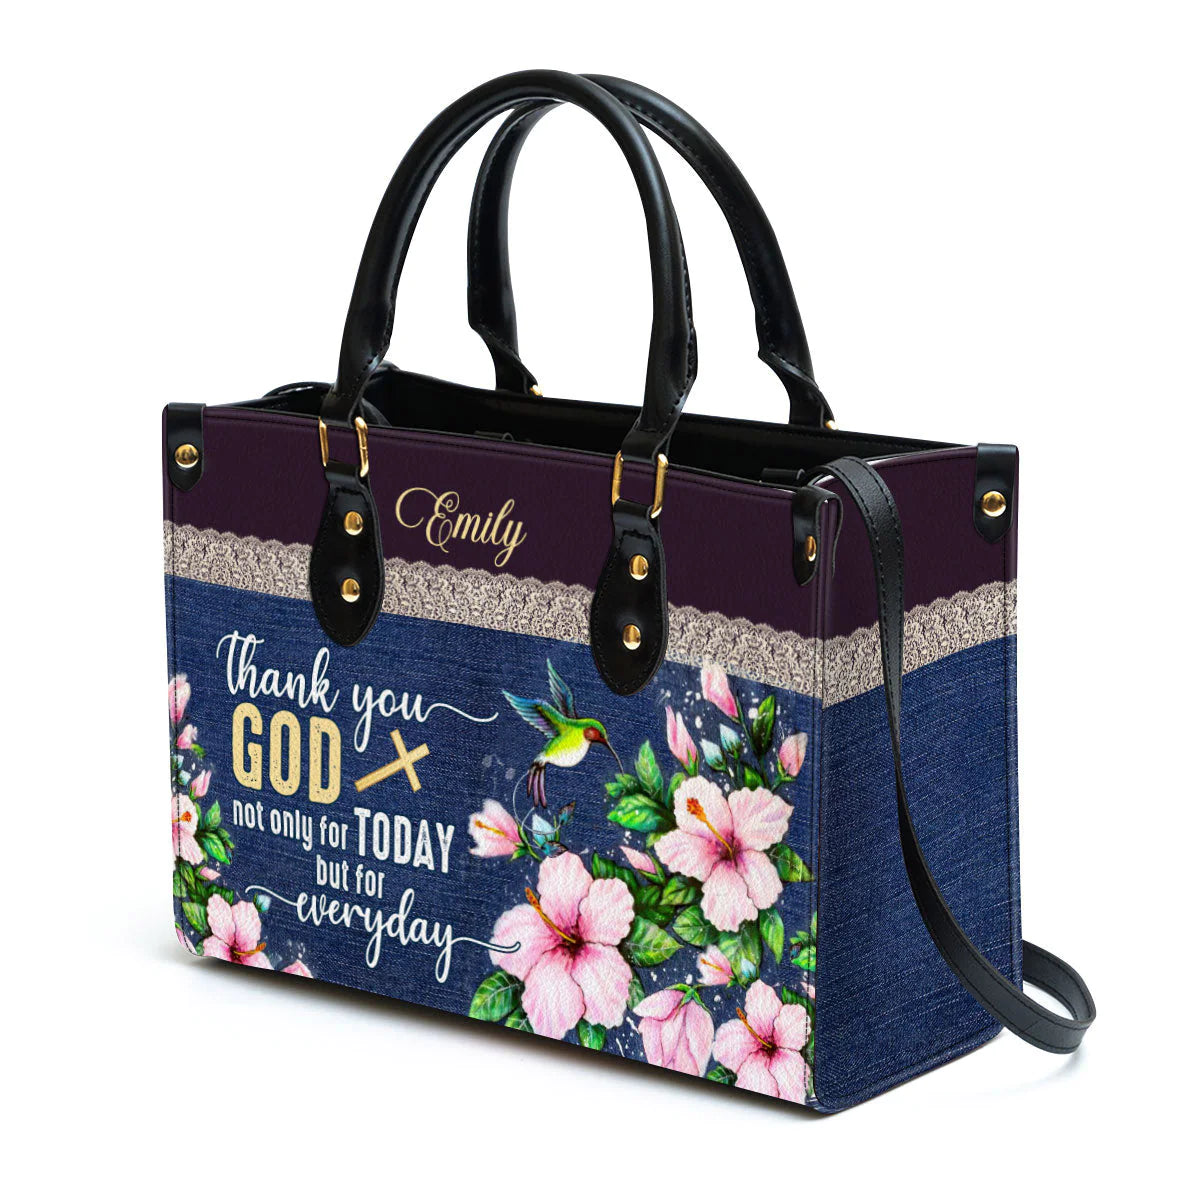 Christianartbag Handbags, Thank You God Not Only For Today But For Everyday Flower And Humming Bird Leather Bags, Personalized Bags, Gifts for Women, Christmas Gift, CABLTB01300723. - Christian Art Bag